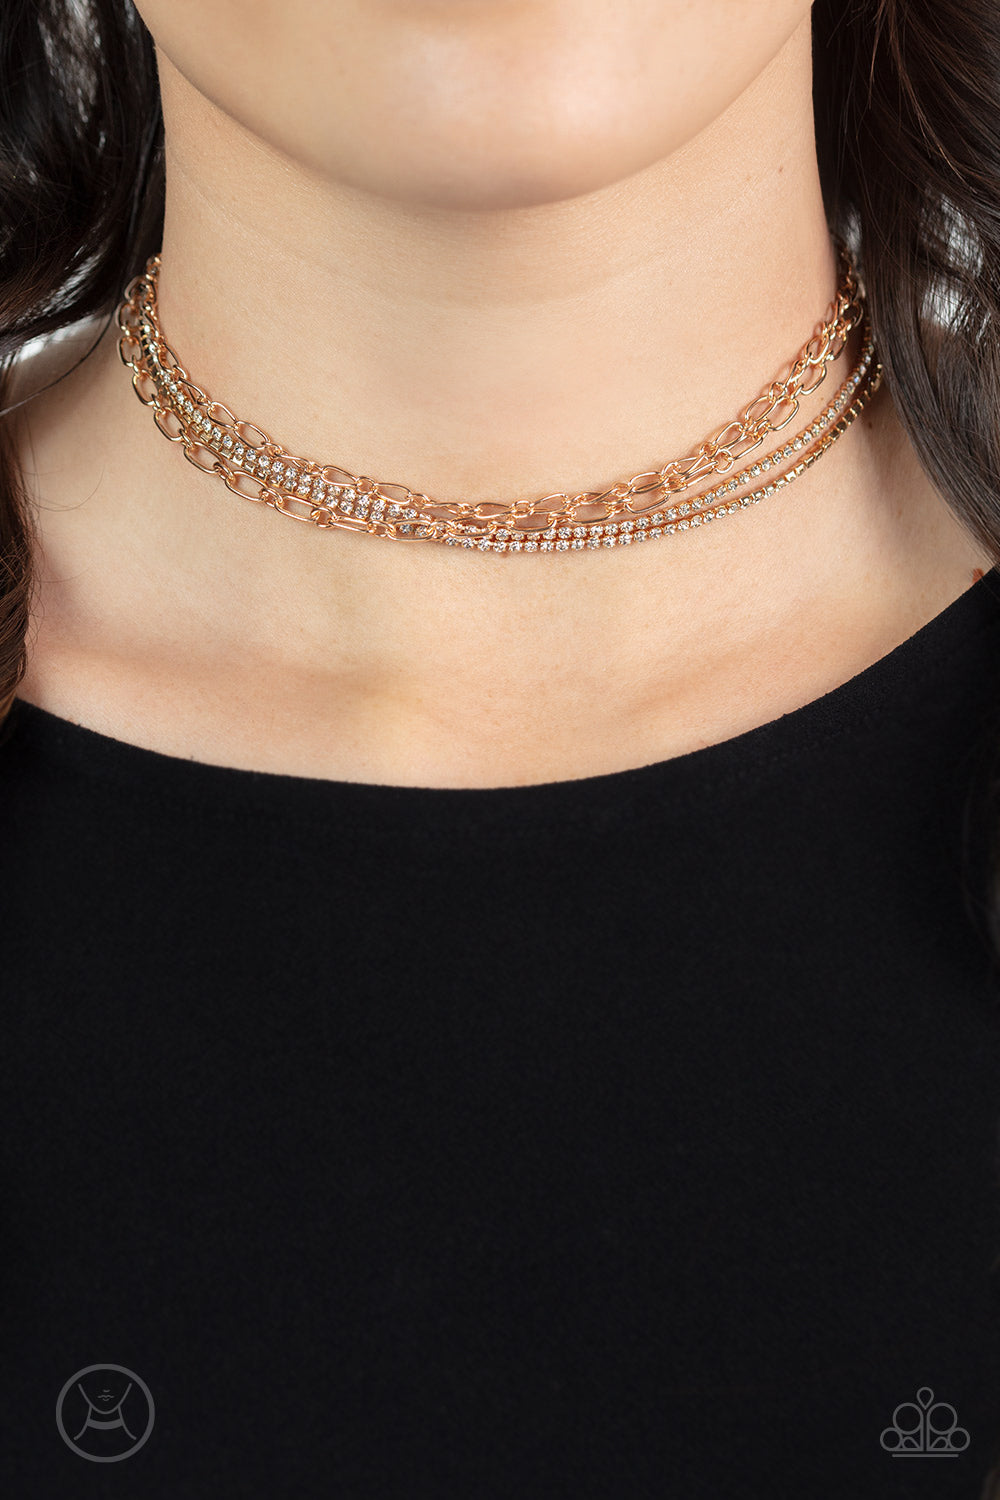 Glitter and Gossip - Gold Choker Necklace - Paparazzi Accessories - Pairs of gold chains and strands of glittery white rhinestones layer around the neck, resulting in stacks of shimmer. Features an adjustable clasp closure.  Sold as one individual choker necklace.